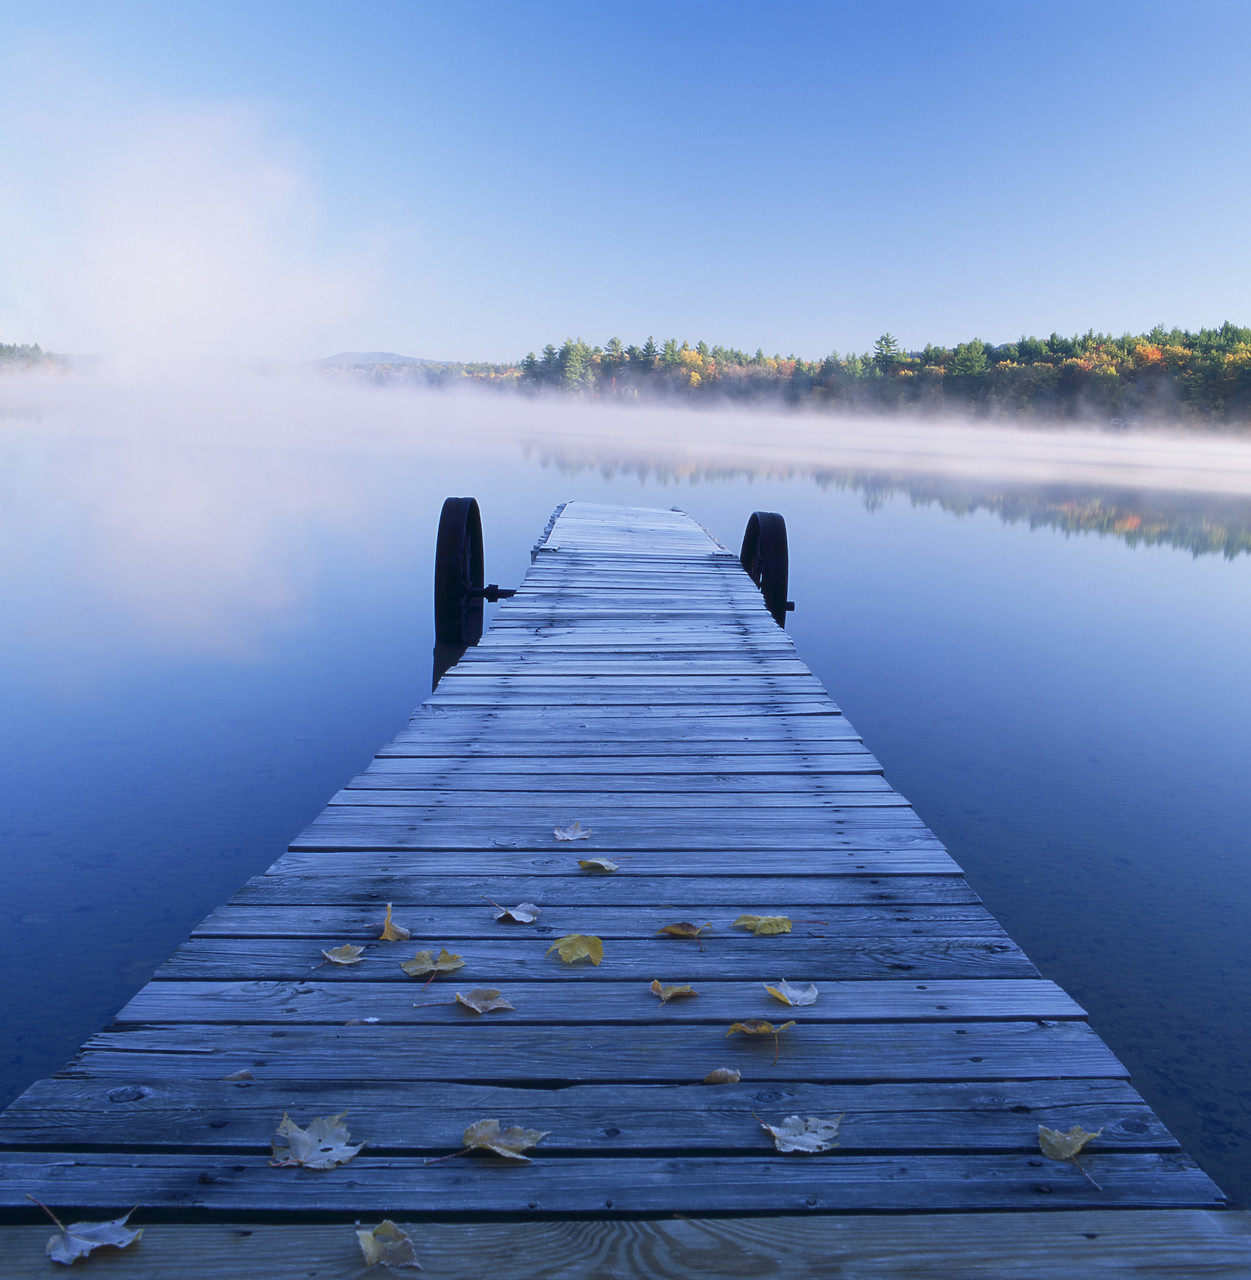 #945051-2 - Jetty on Lake in Mist, Songo Pond, Bethal, Maine, USA